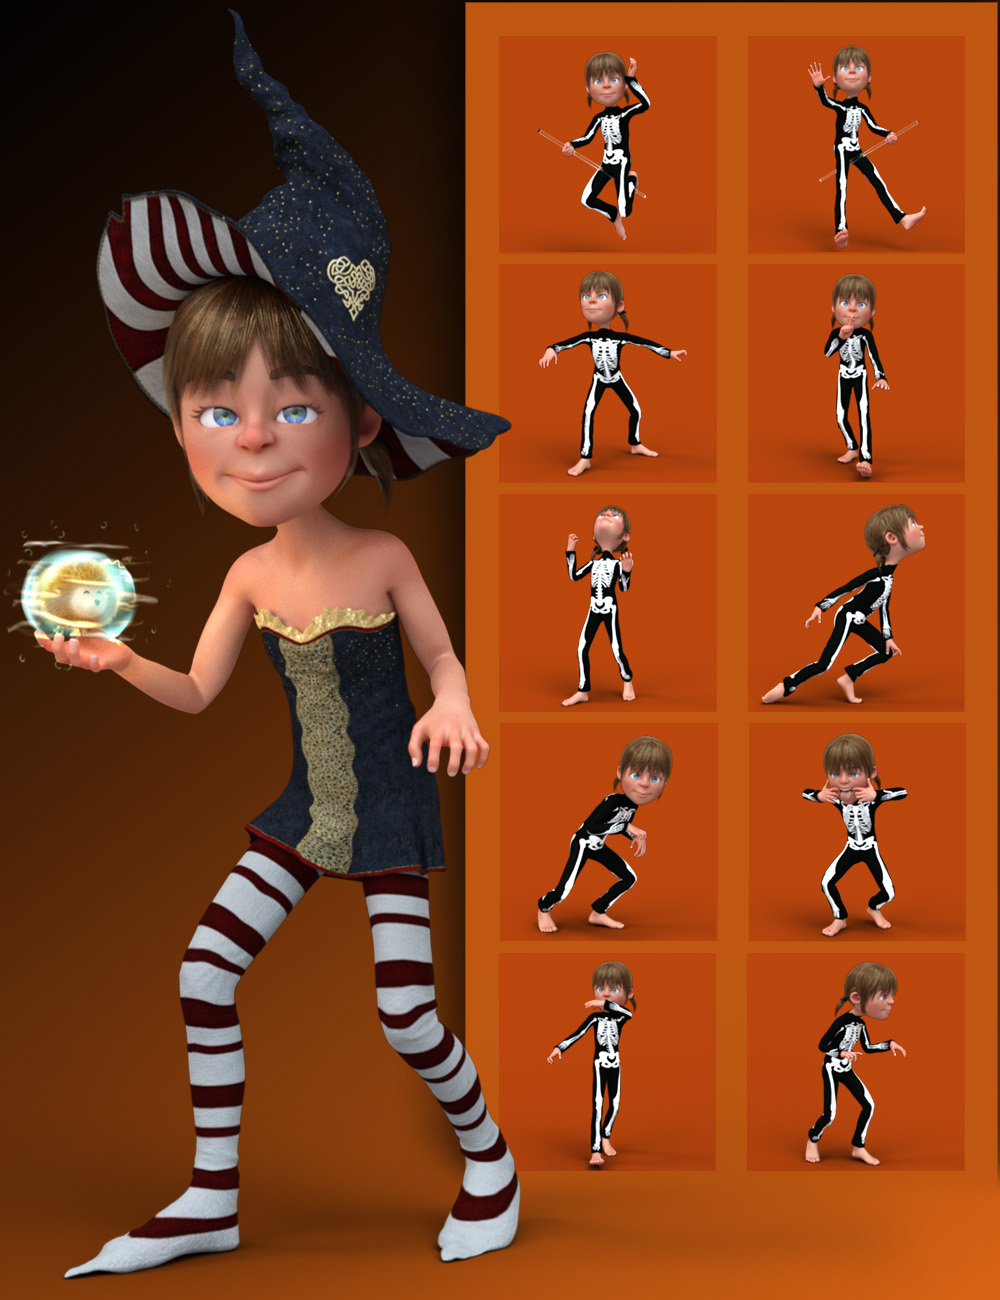 Halloween Poses for Toon Generations 2 by: Quixotry, 3D Models by Daz 3D